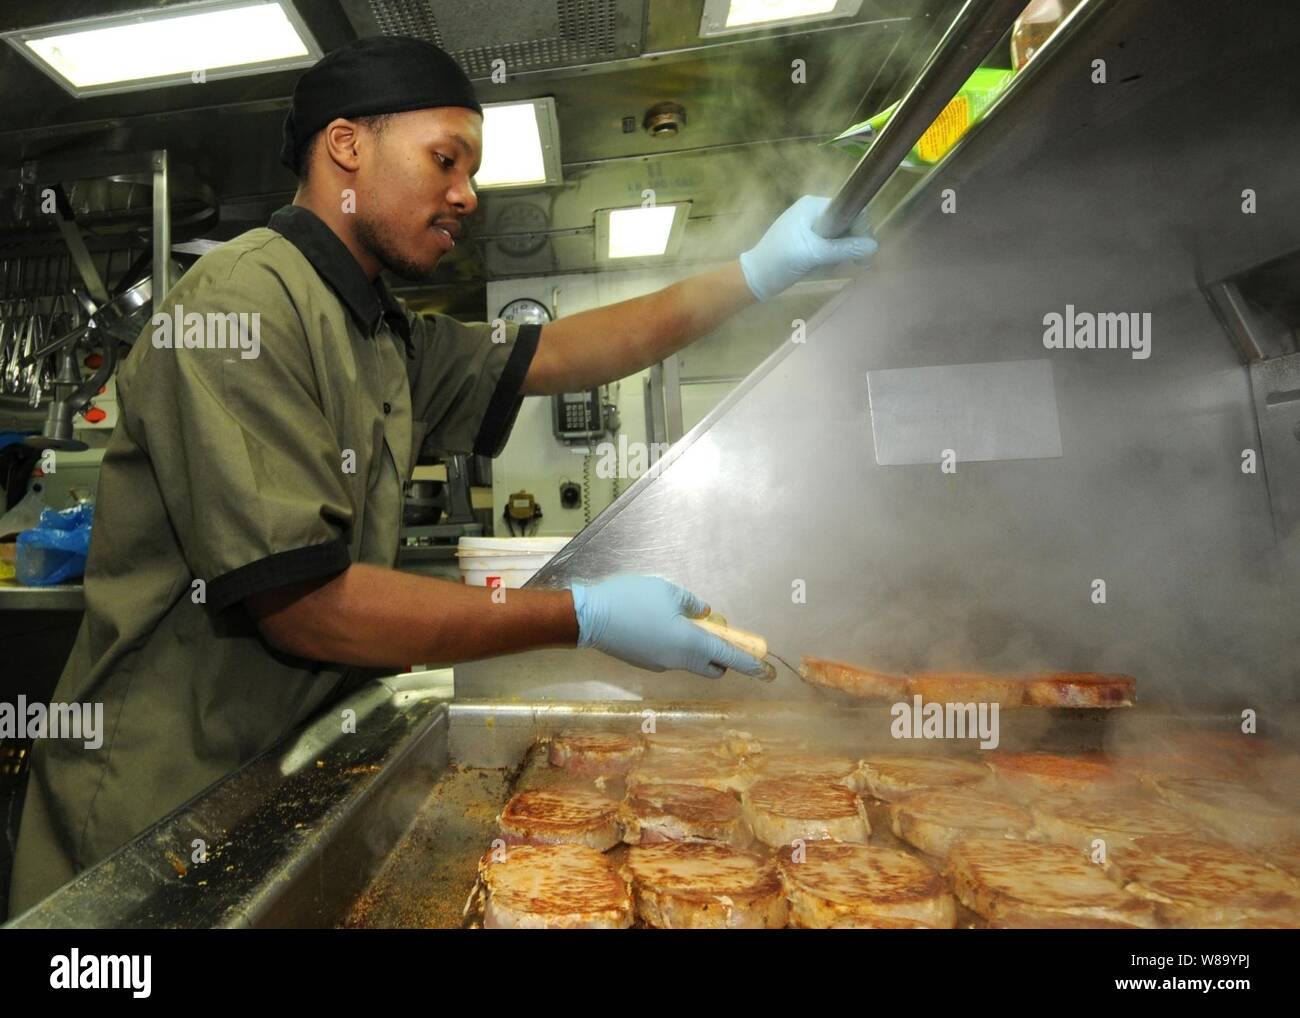 Seaman Diante A. Johnson prepares pork chops in the ship's galley for the crew aboard the guided-missile cruiser USS Anzio (CG 68) underway in the Pacific Ocean on Jan. 24, 2011. Stock Photo